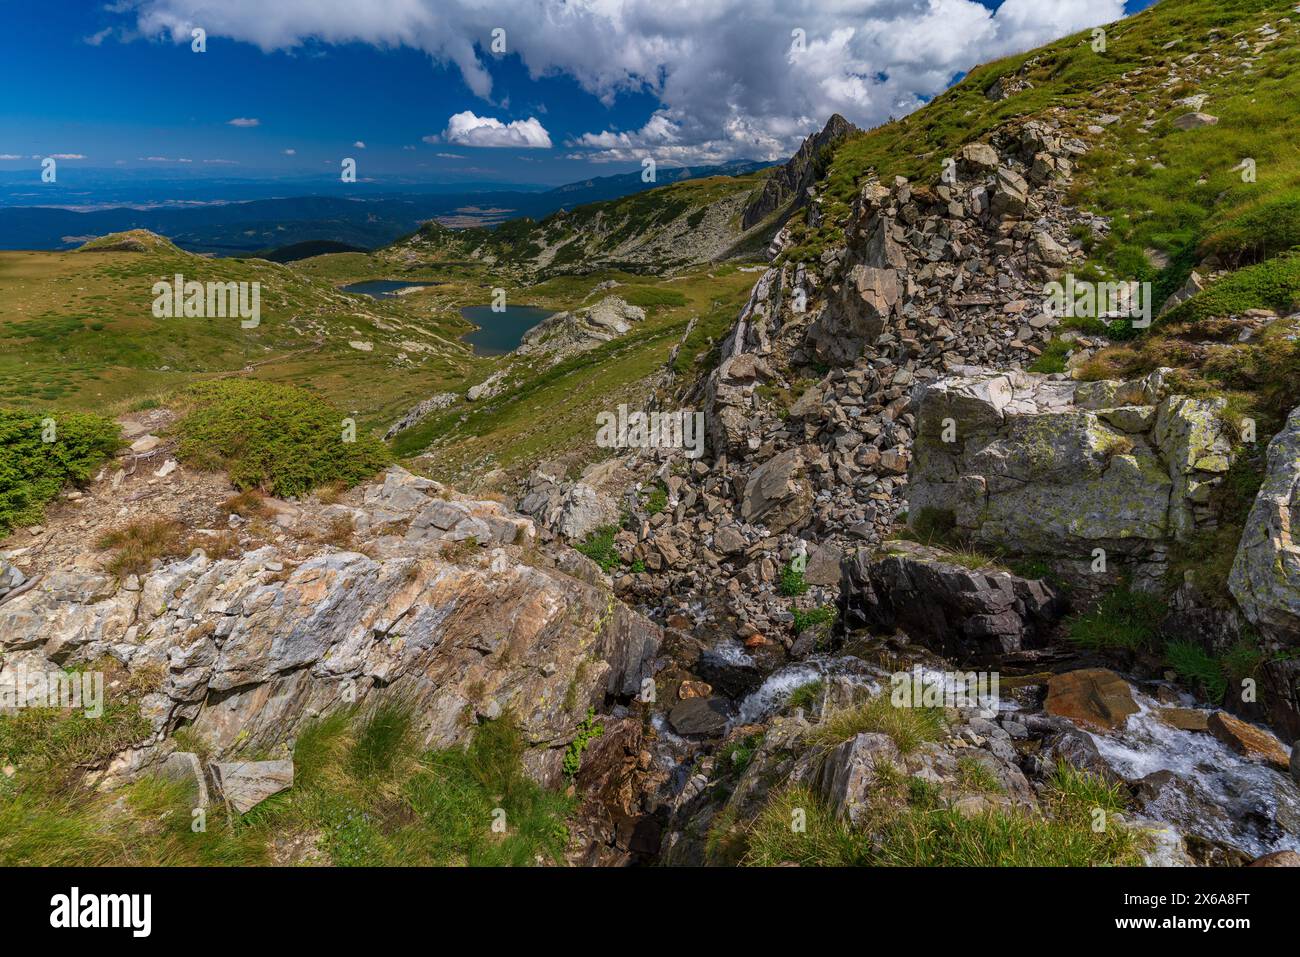 The hiking trail for the Seven Rila Lakes in Bulgaria Stock Photo